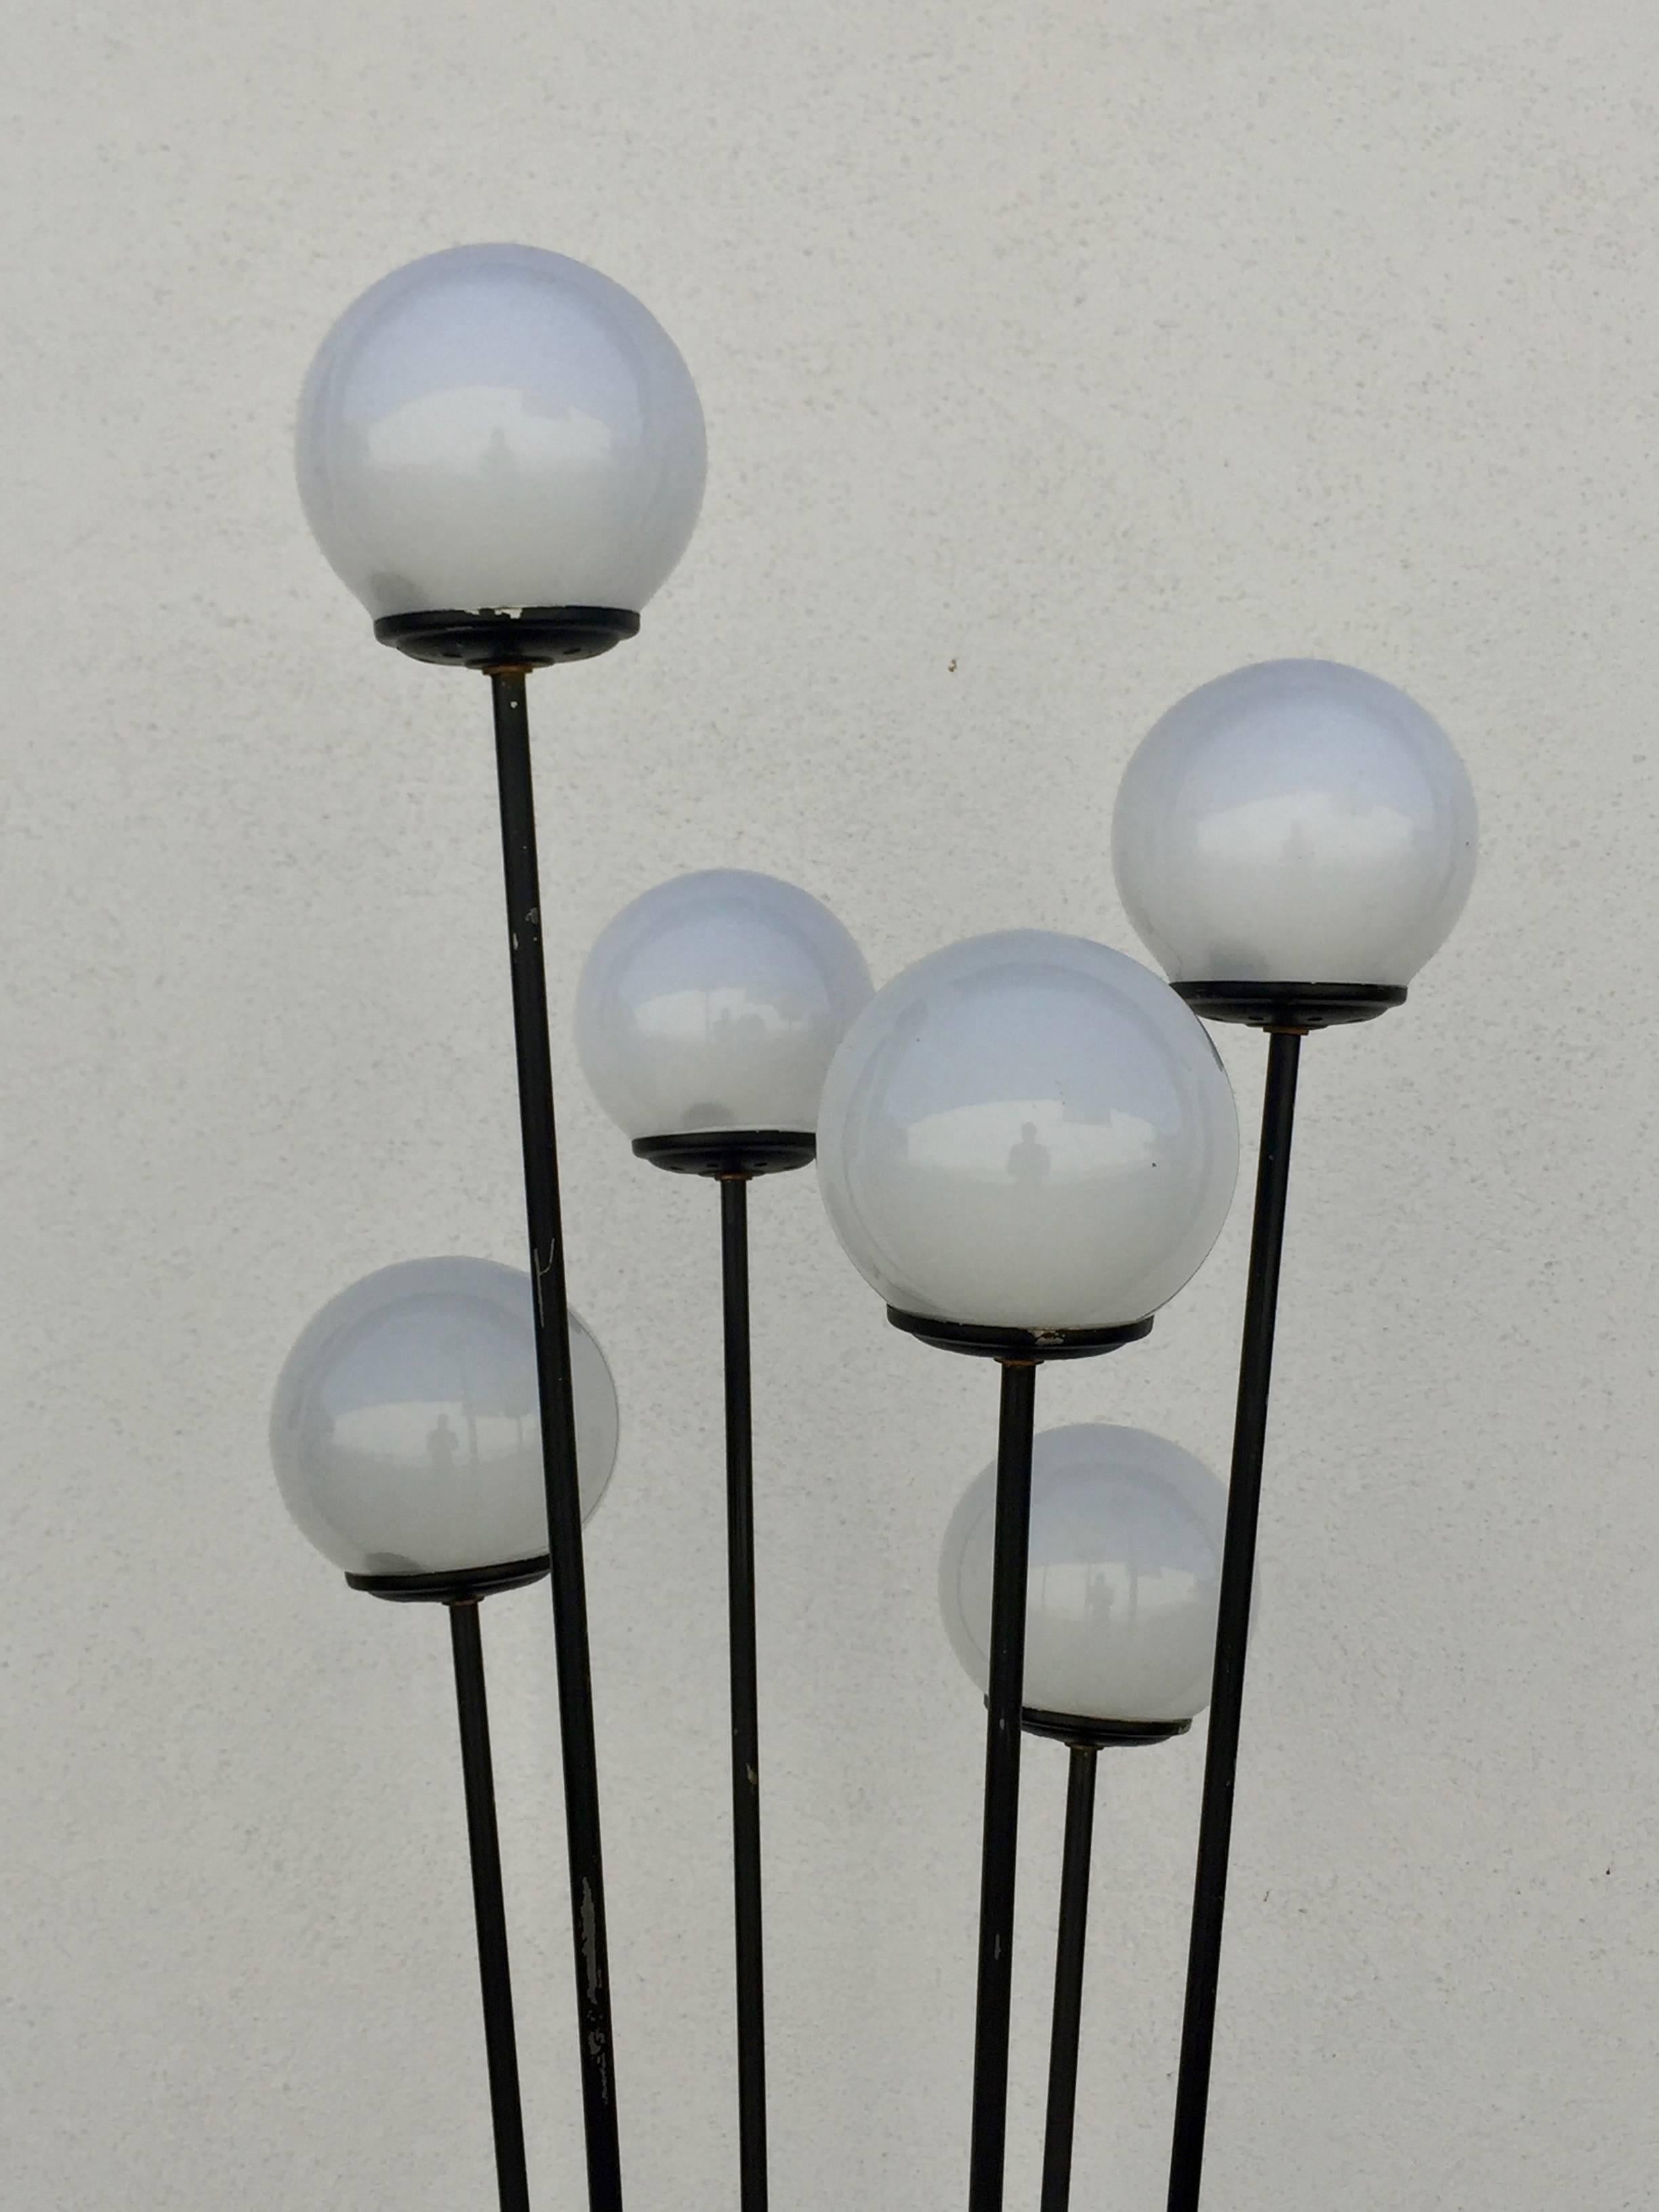 Painted Unusual French Midcentury Glass Globe Cluster Floor Lamp